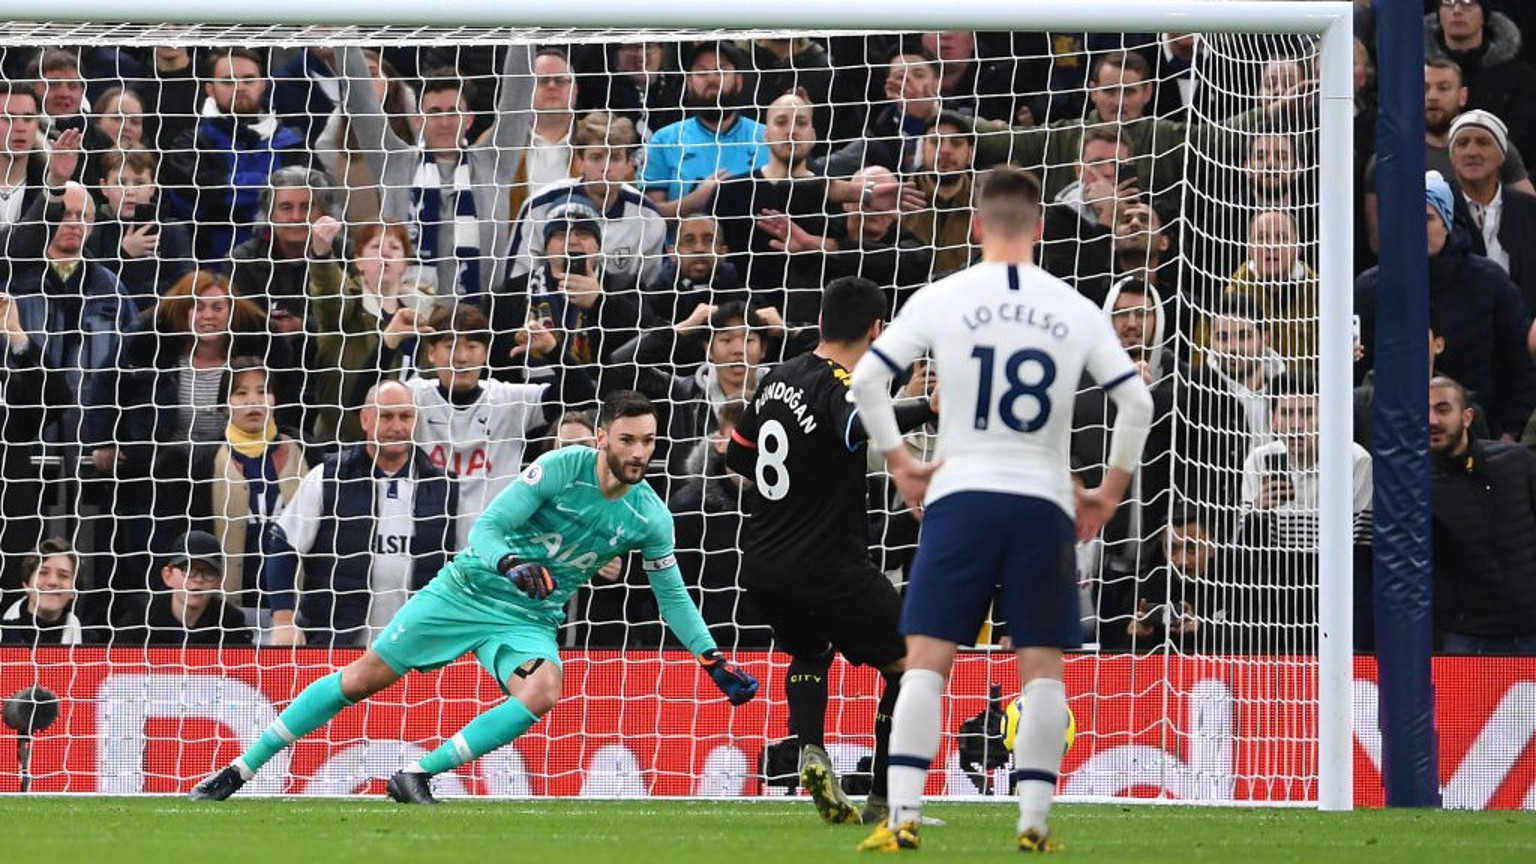 DENIED: Gundogan's spot-kick five minutes before the interval is saved by Lloris.